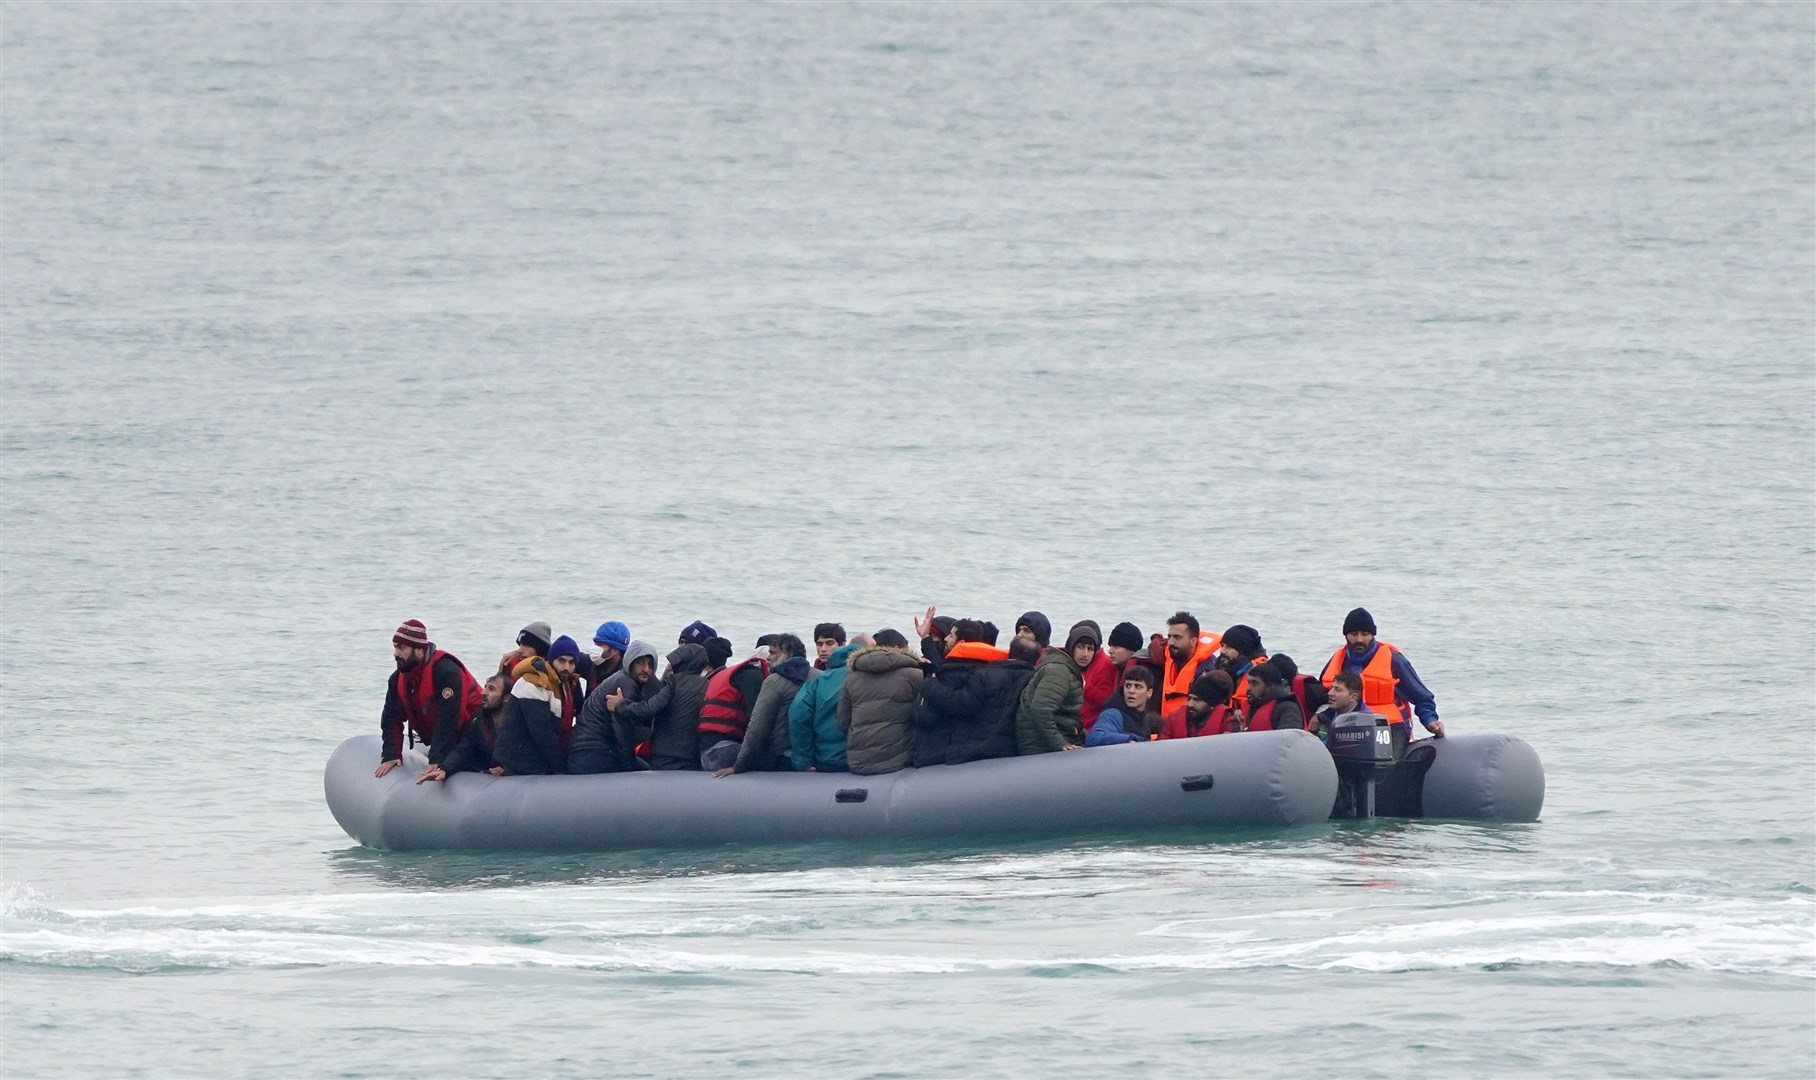 A group thought to be migrants adrift in a dinghy in the Channel (Gareth Fuller/PA)